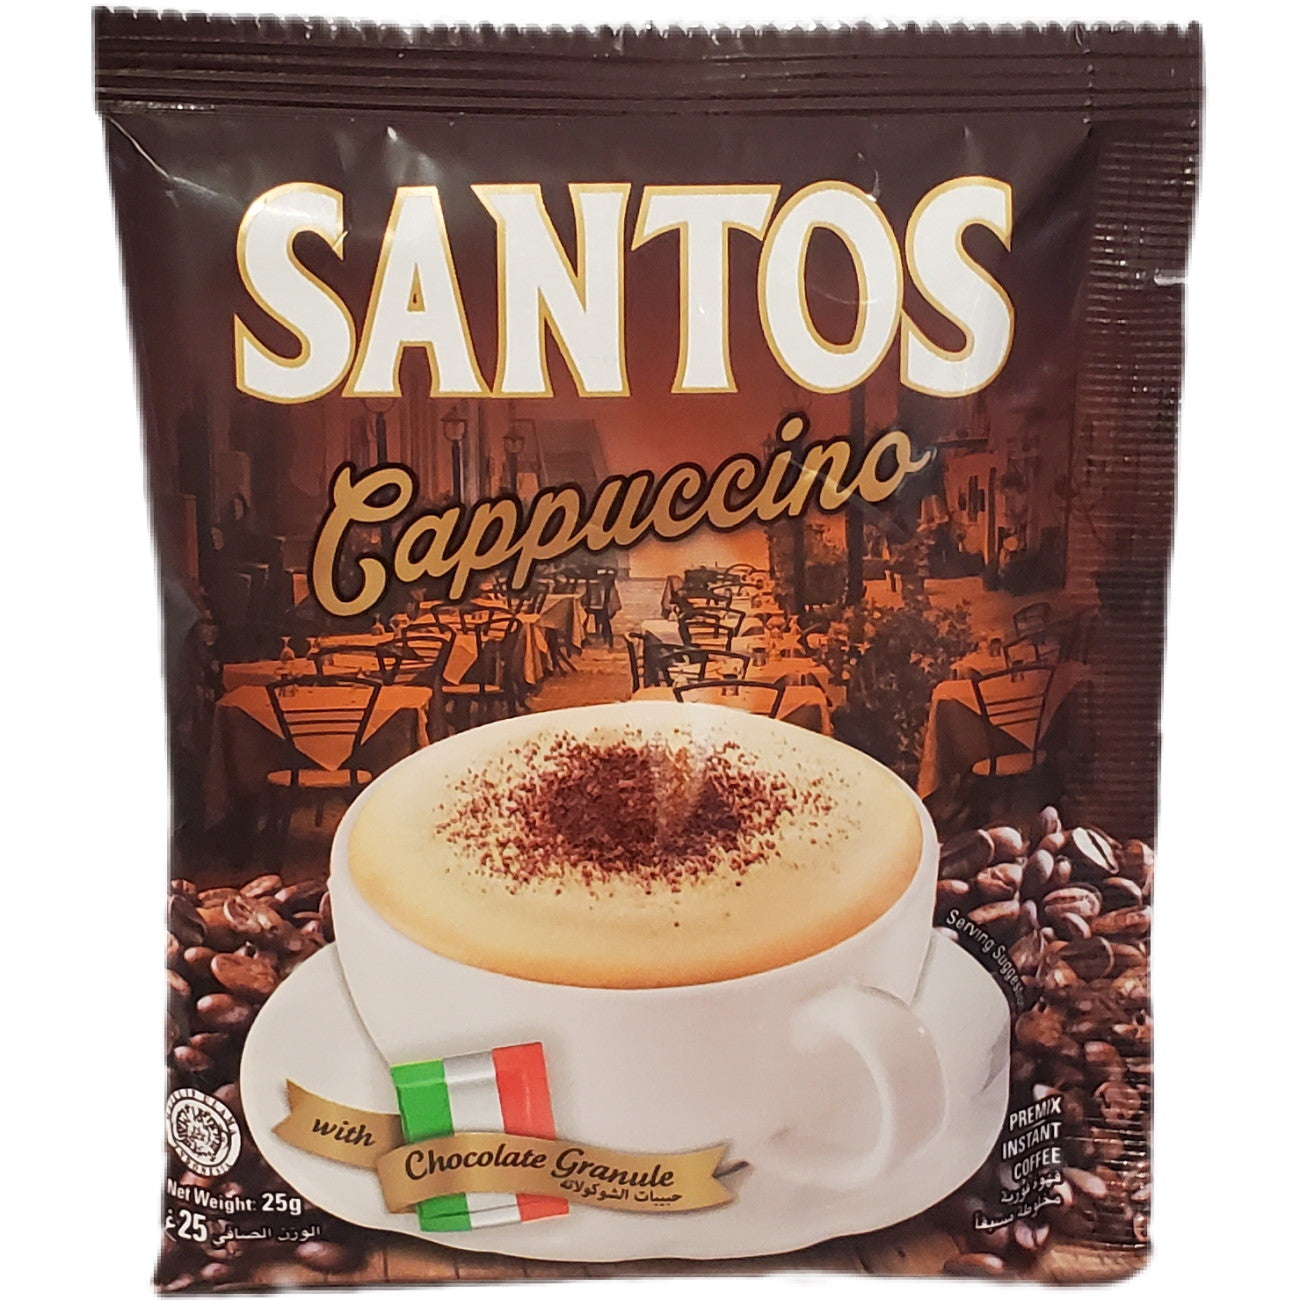 Santos Cappuccino sachet. Coffee beans and a cup of foamy cappuccino sprinkled with chocolate granules are pictured. 